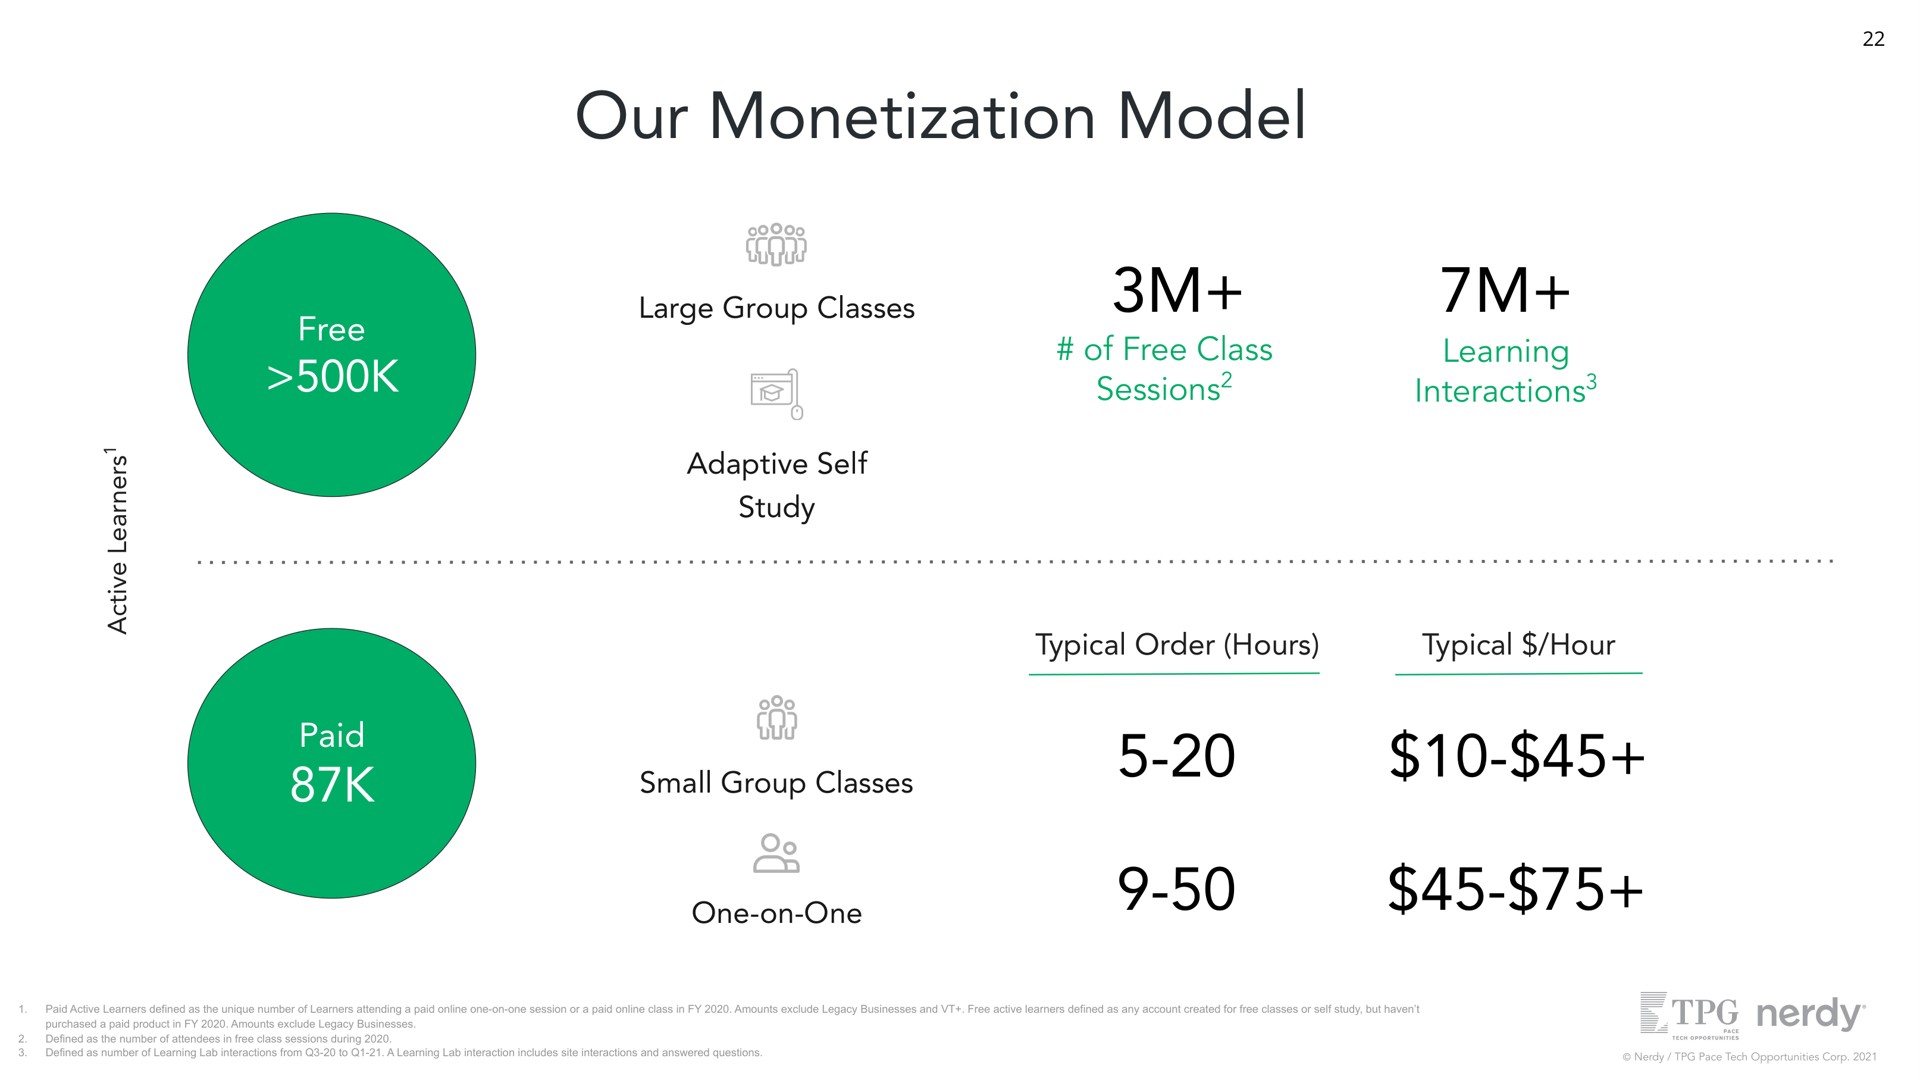 our monetization model free large group classes adaptive self study of free class sessions learning interactions typical order hours typical hour paid small group classes one on one | Nerdy